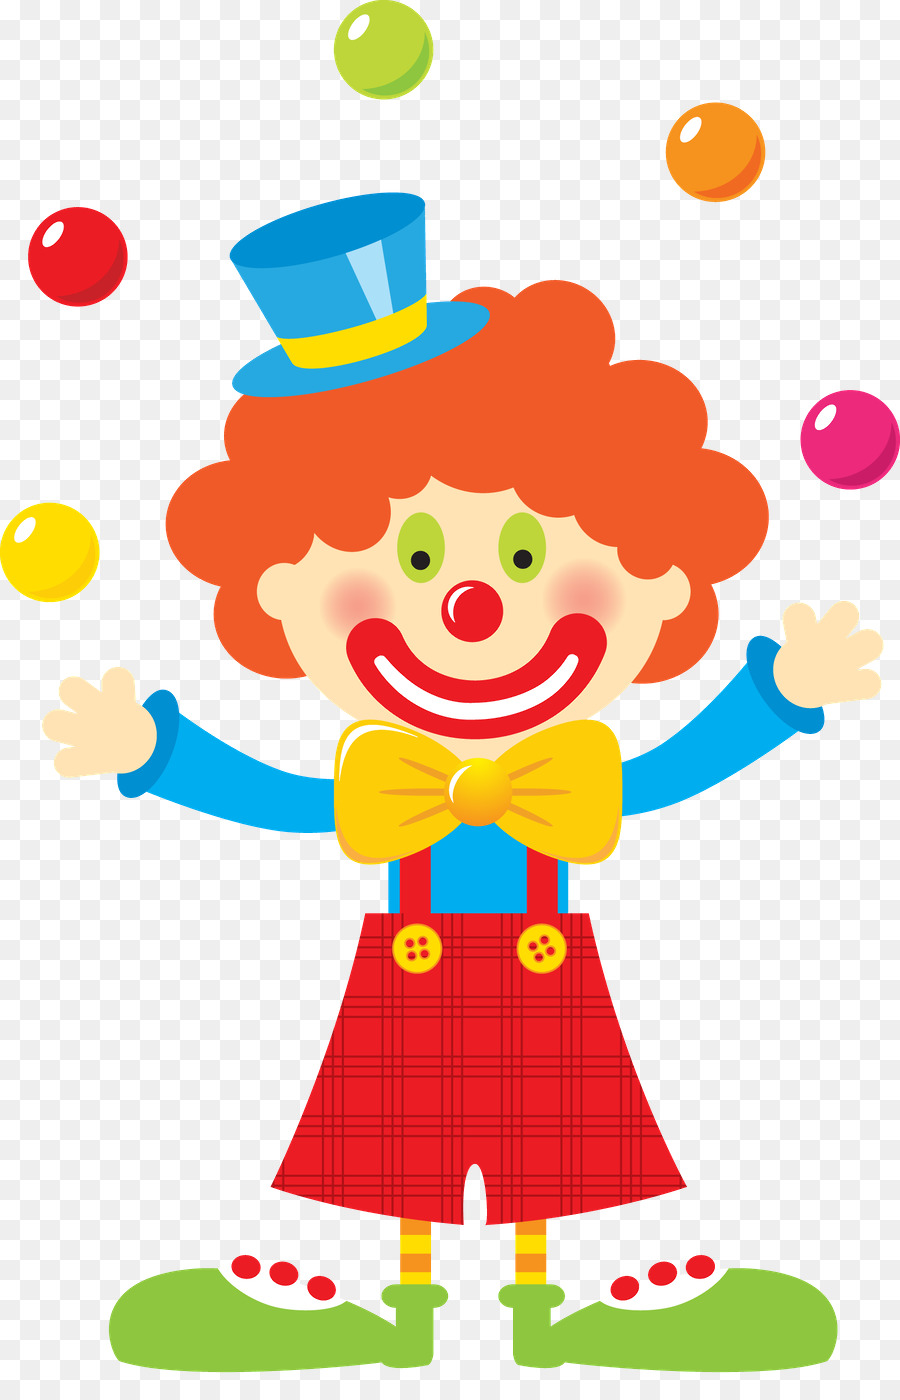 Circus baby clipart.